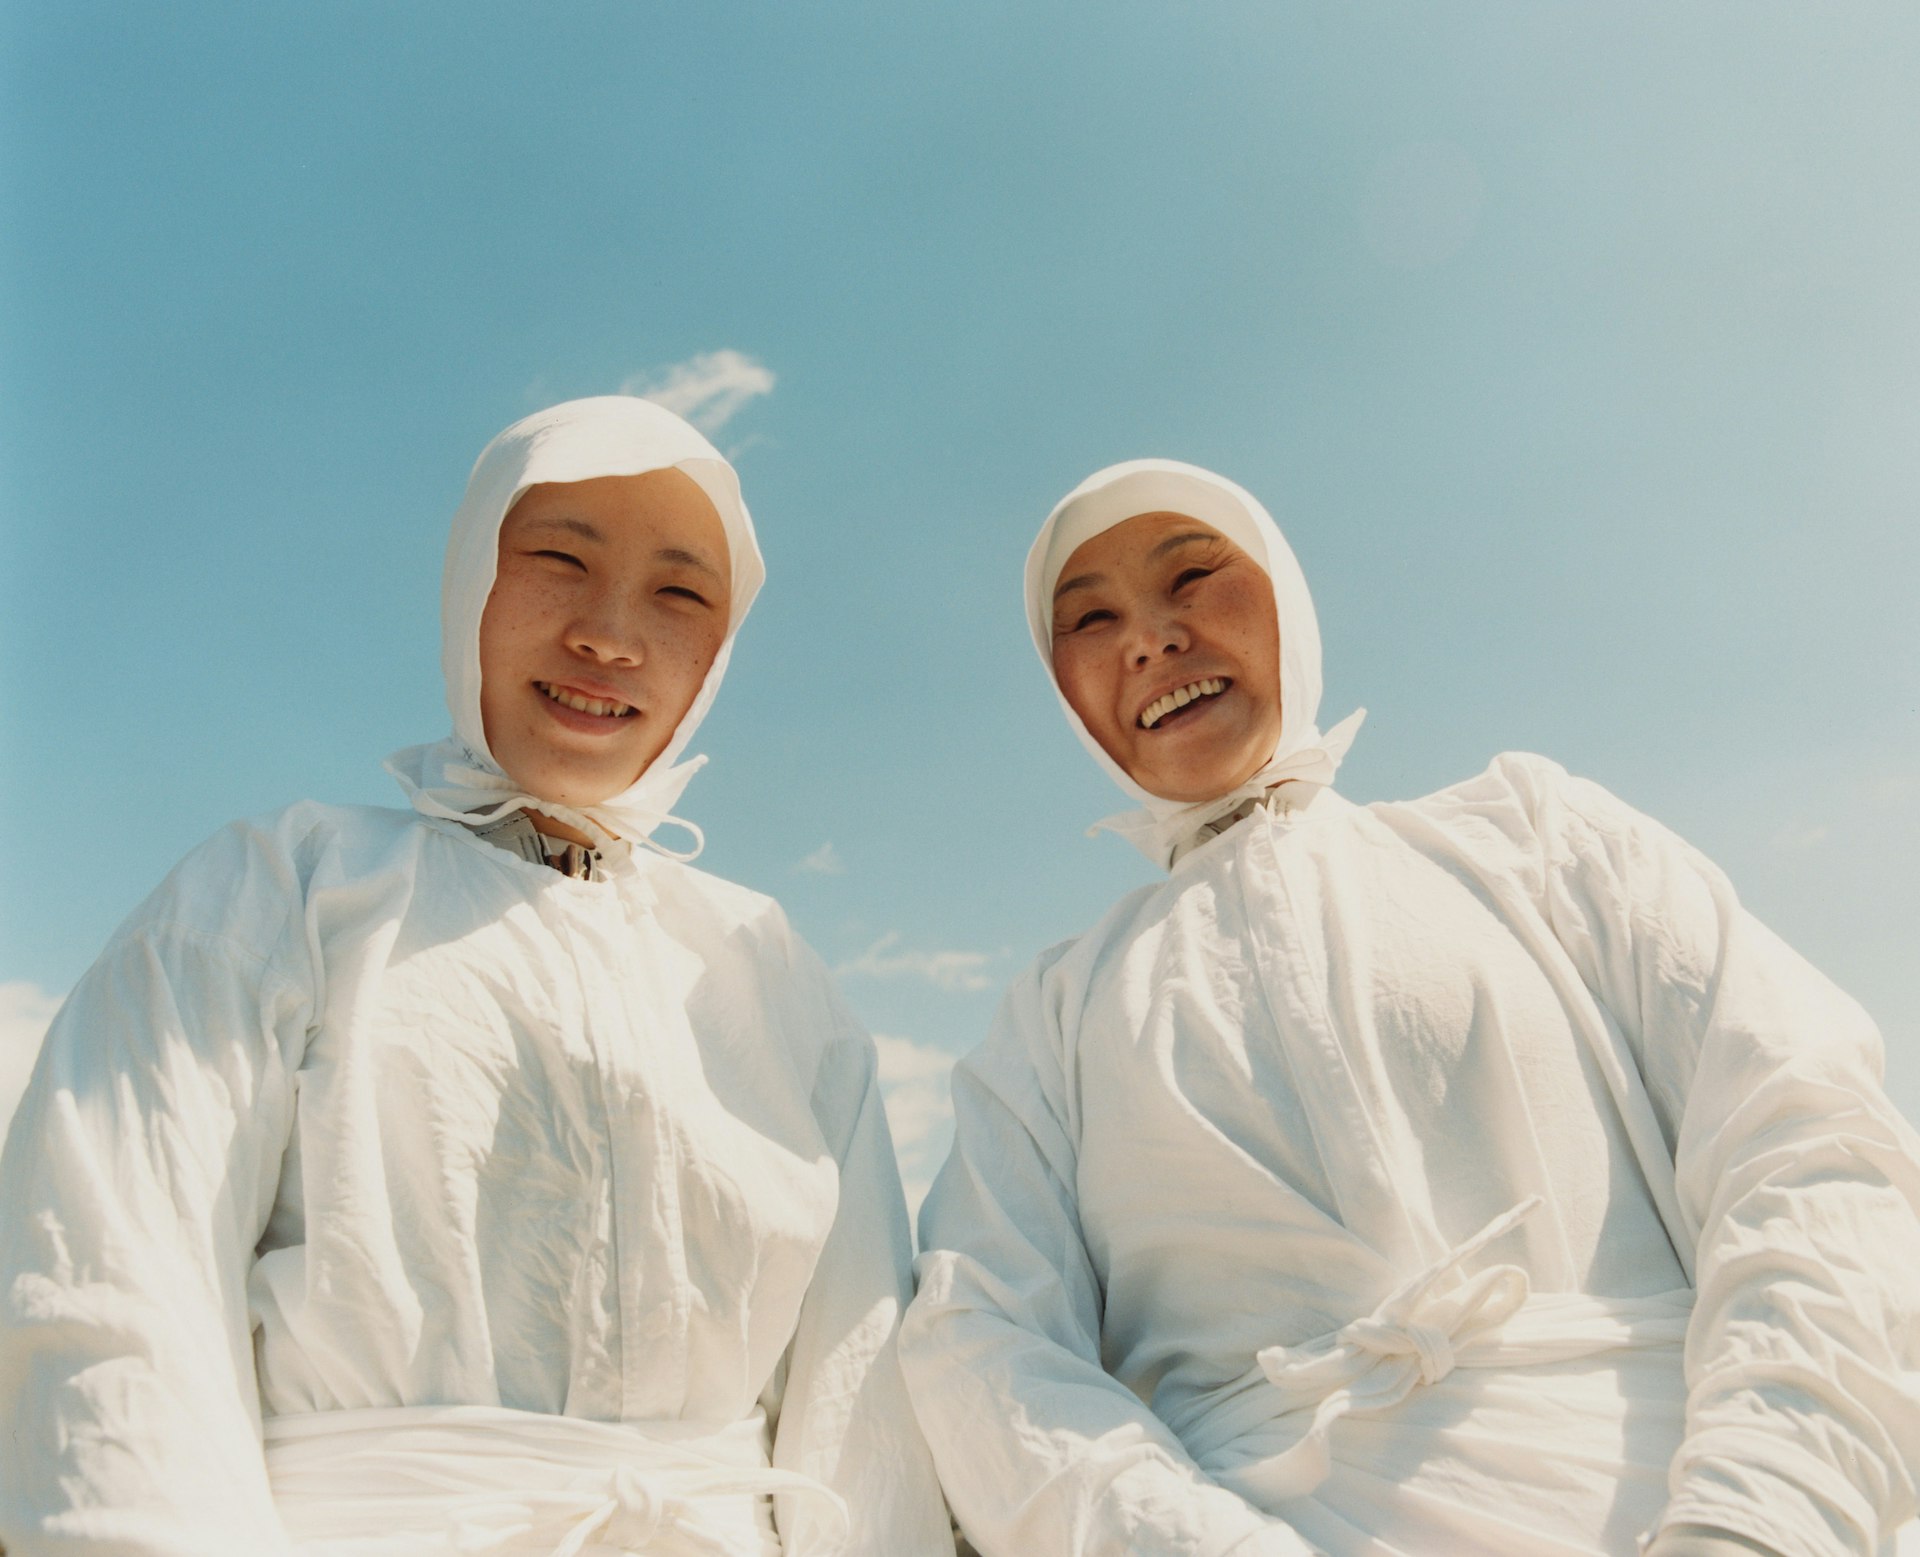 Documenting the tradition of Japan’s female pearl divers